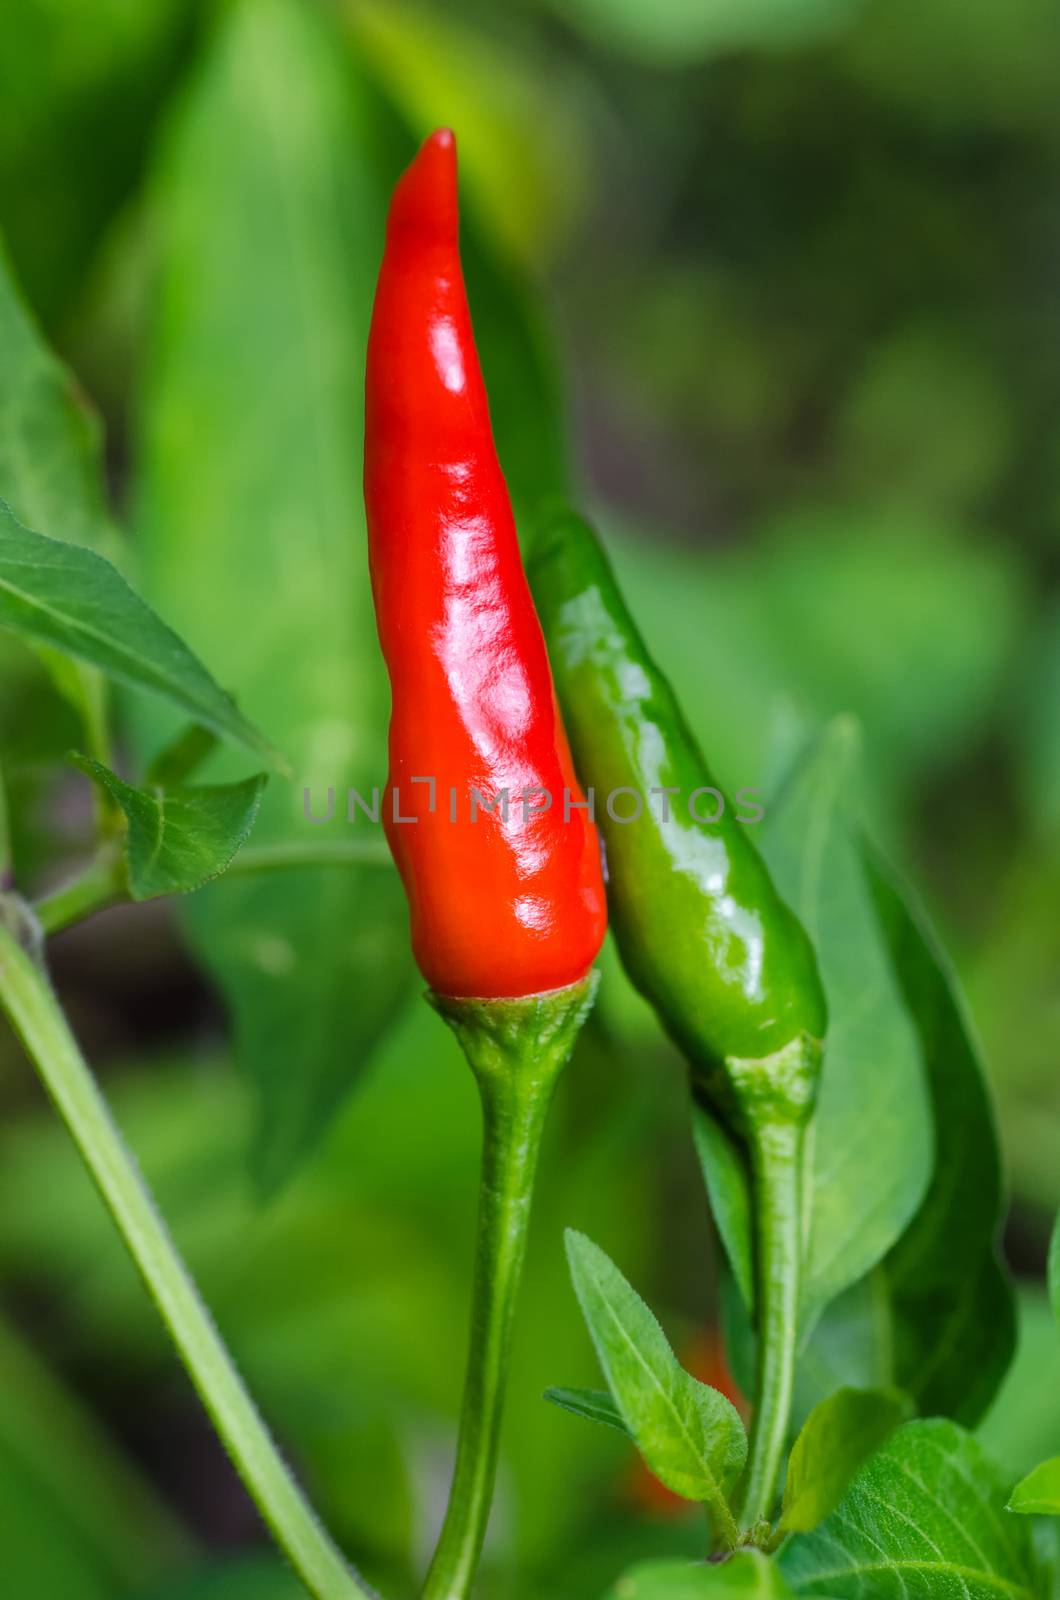 Red/ripe and green chillies on a live plant